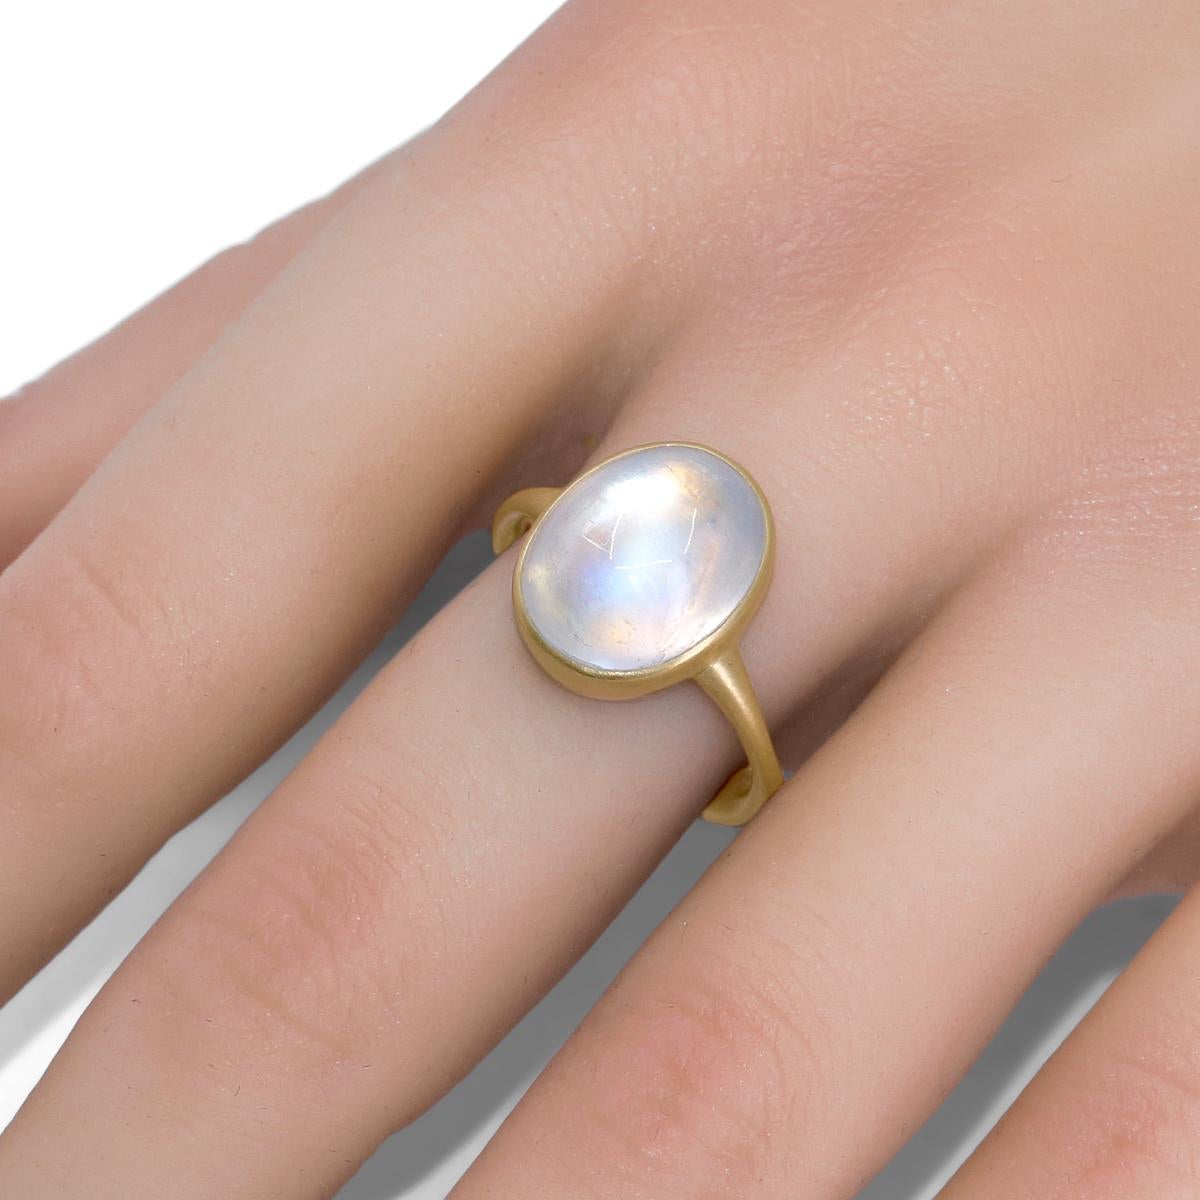 One of a Kind Ring handmade in signature-finished 18k yellow gold by jewelry artist Lola Brooks featuring a vibrant 7.04 carat oval rainbow moonstone cabochon, bezel-set atop a hand-fabricated tapered gold band. Size 7.0 (can be sized upon request).